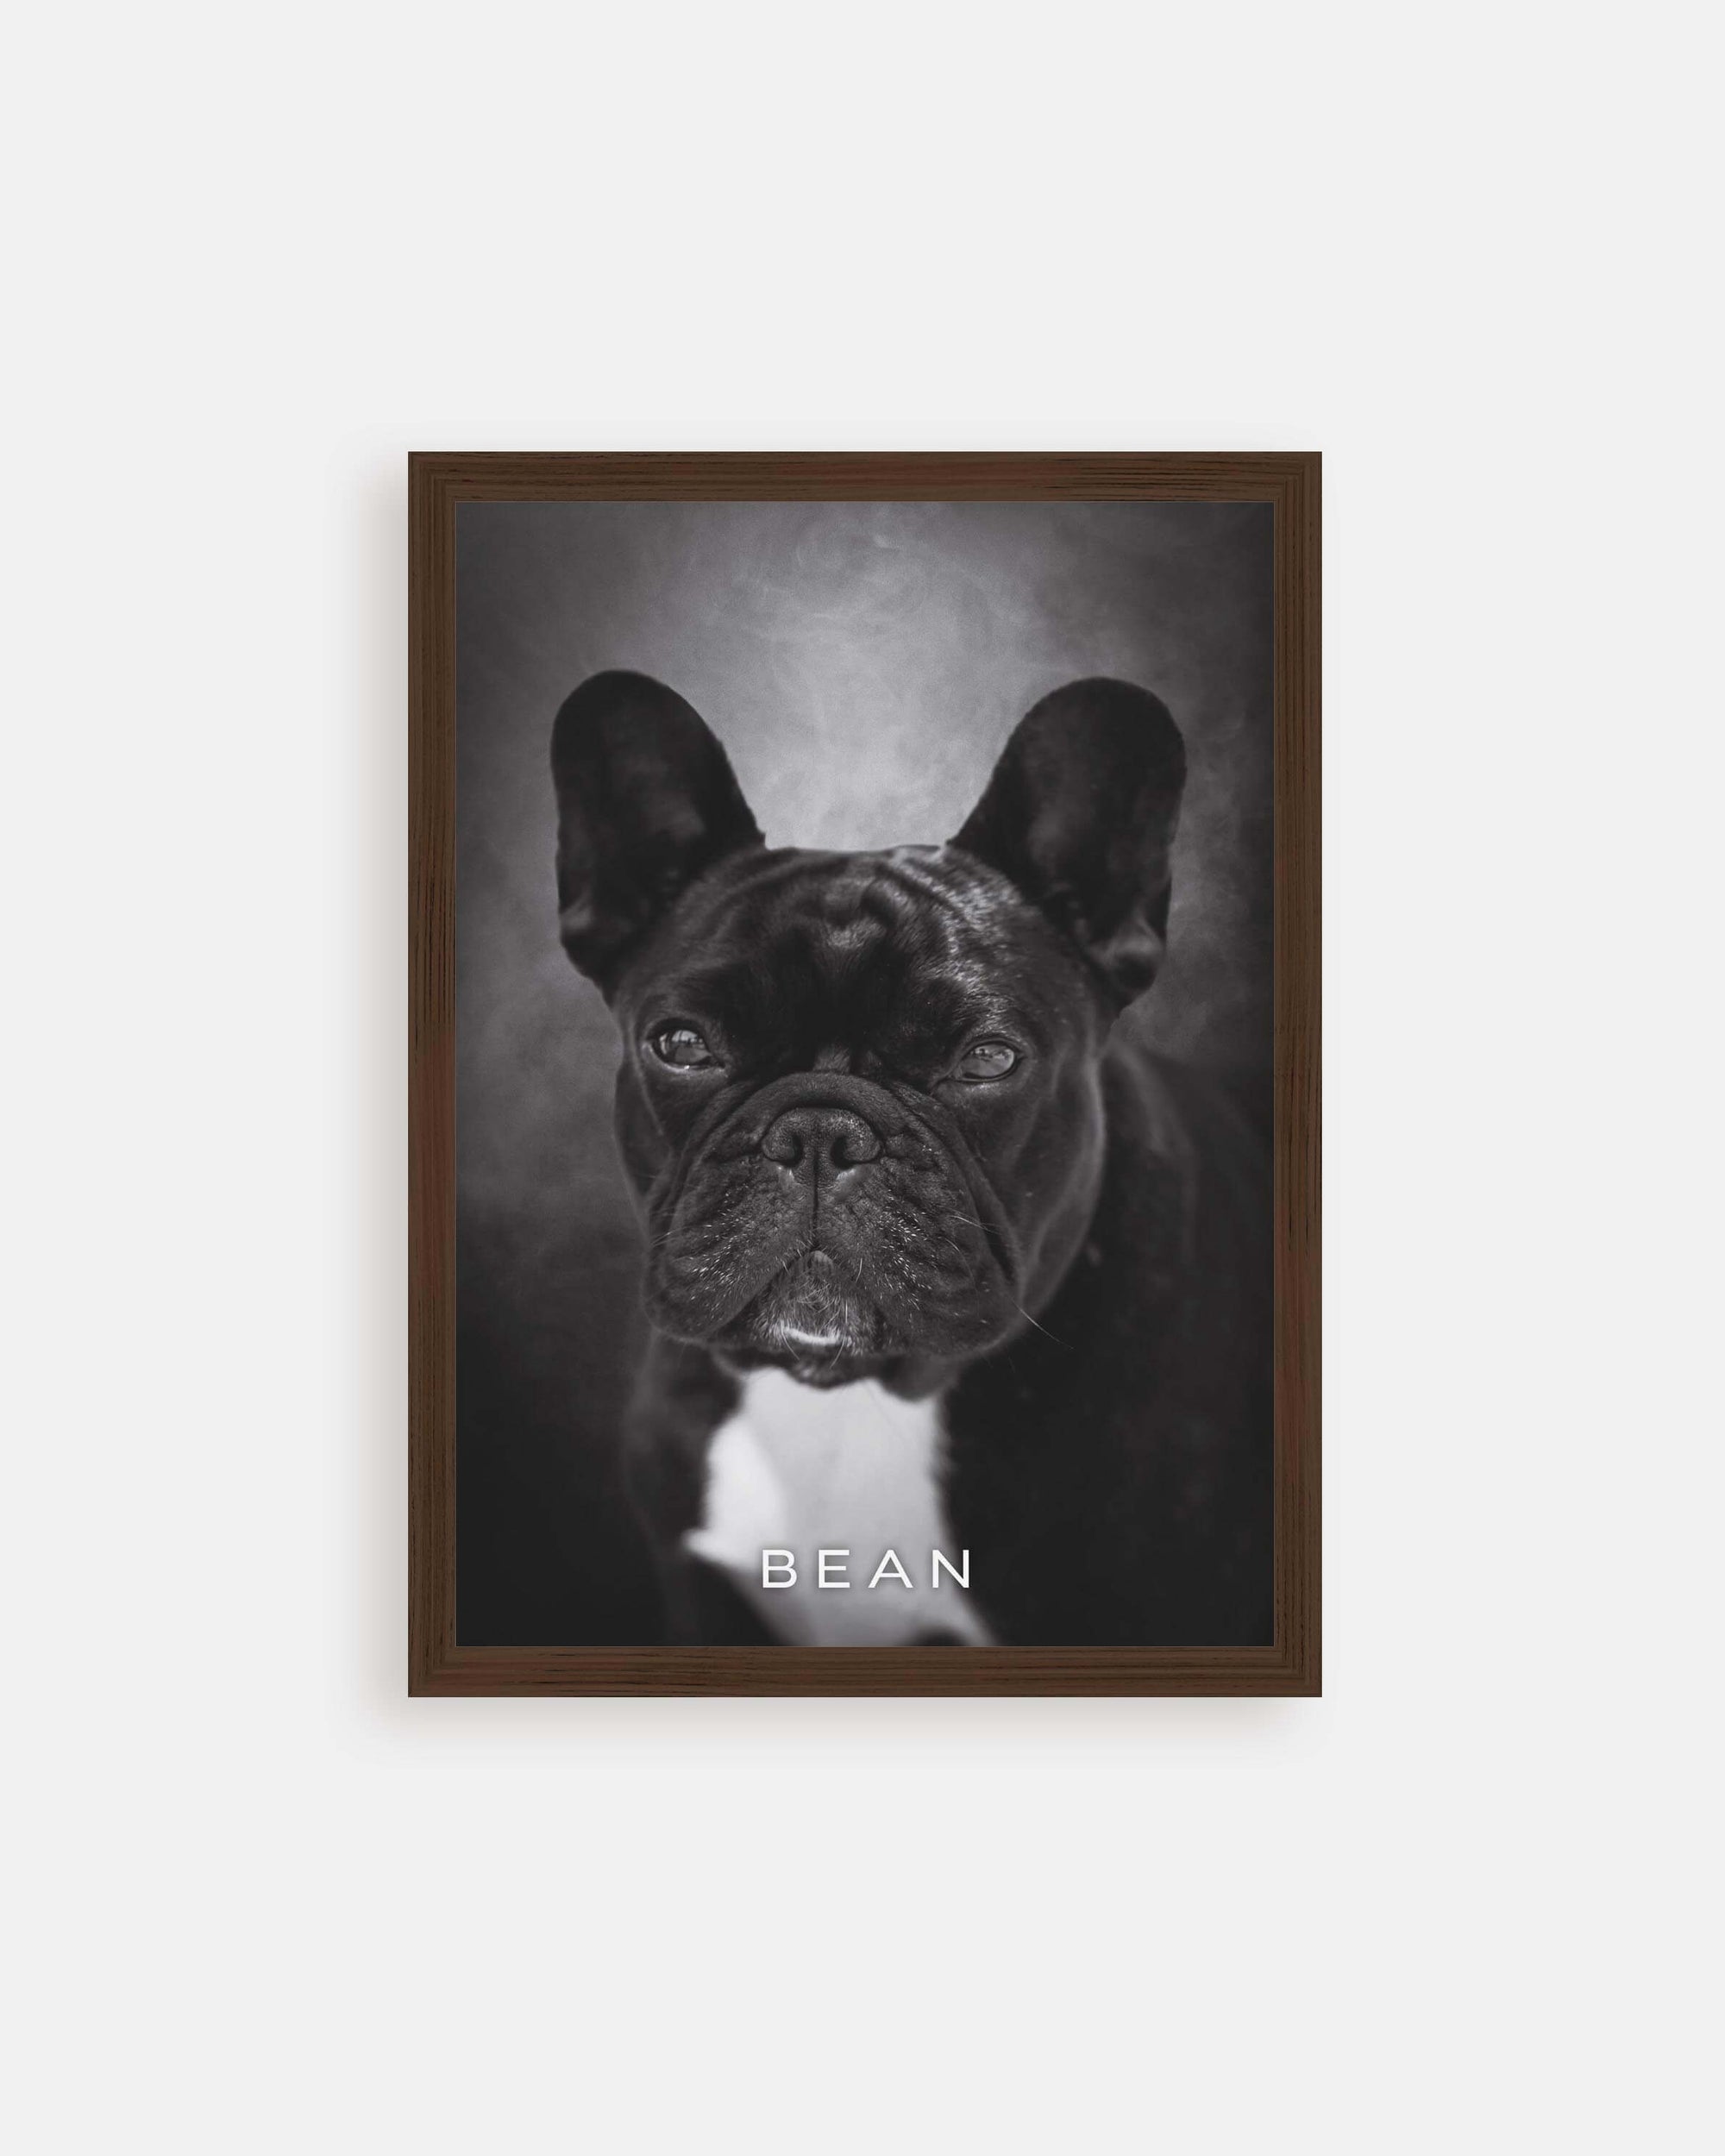 framed black and white art print of dog on poster frame in home decor setting, a gift idea to dog mom or dog dad pet parents personalized pet portrait created by Vogue Paws dog art